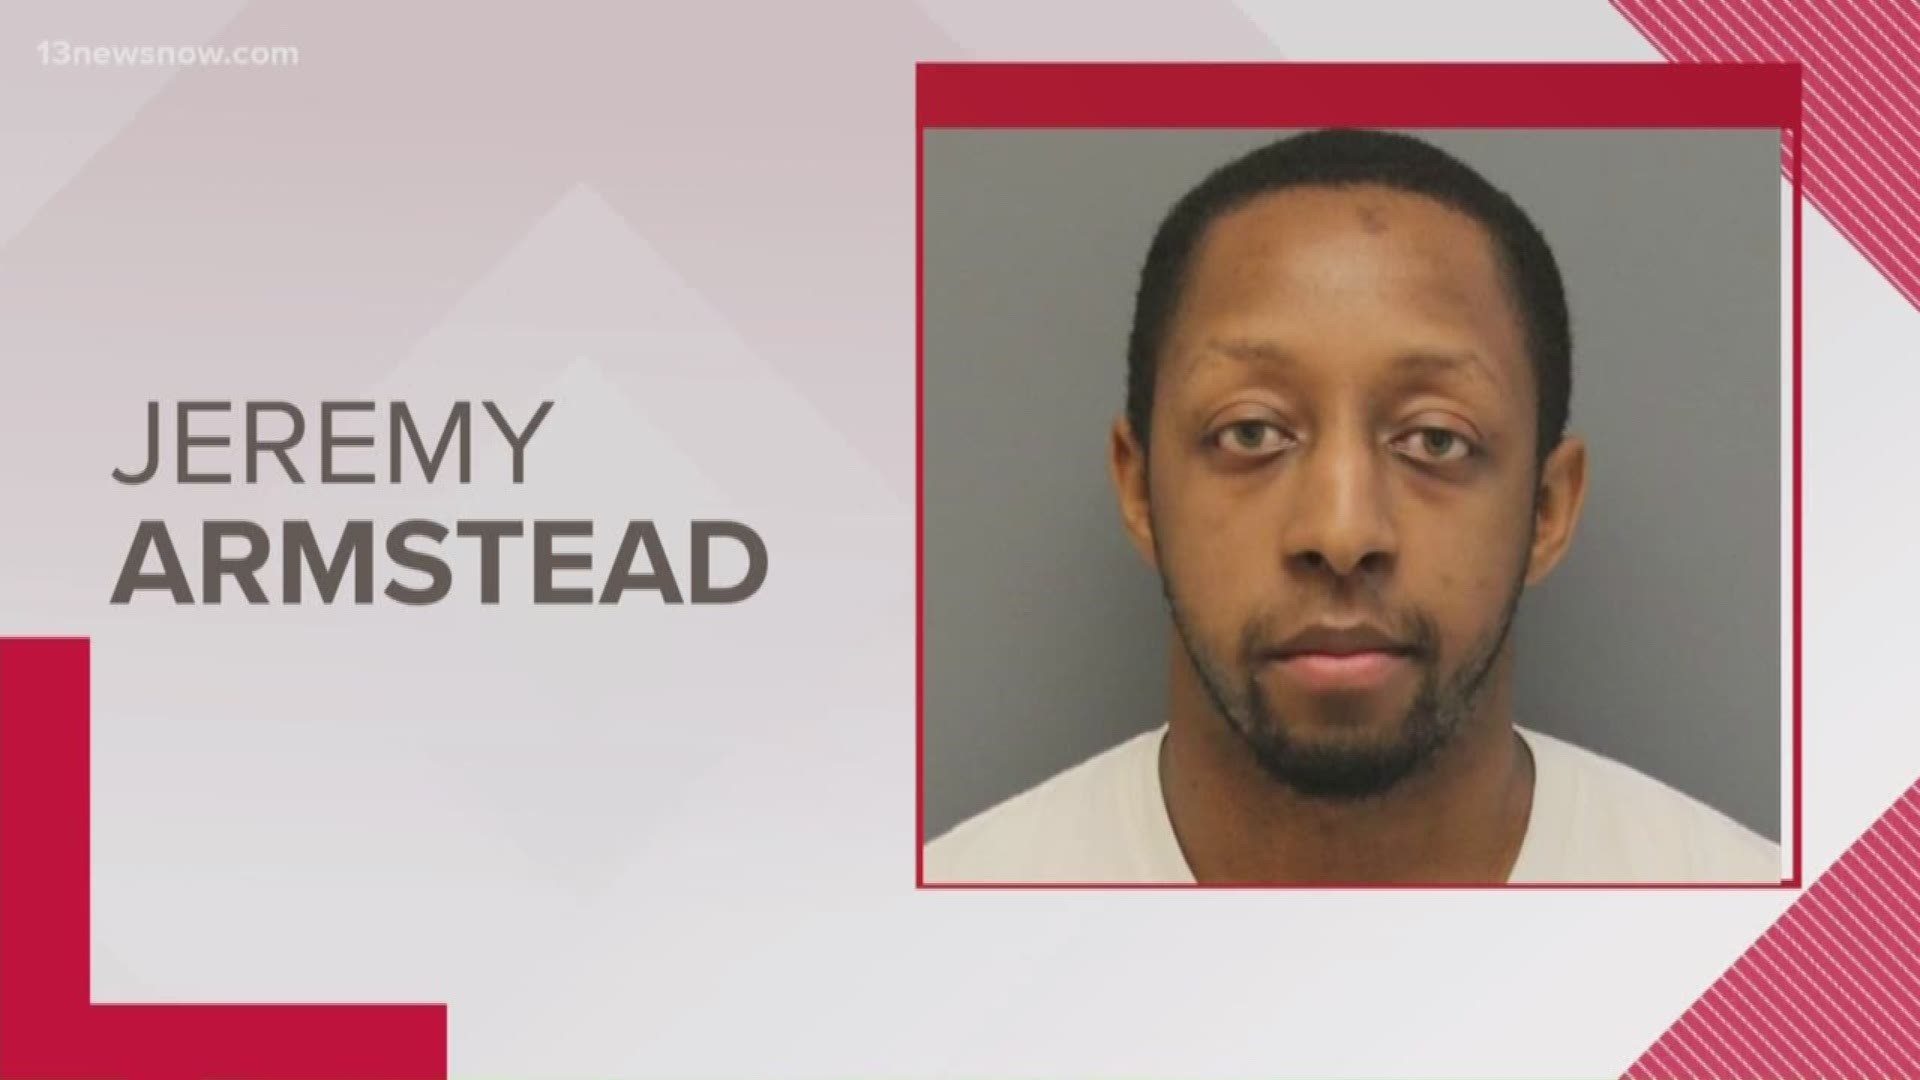 Jeremy Allen Armstead, 30, of Williamsburg, was arrested and charged with four counts of abduction by force, intimidation or deception, five counts of rape, four counts of sodomy, strangulation and indecent exposure.